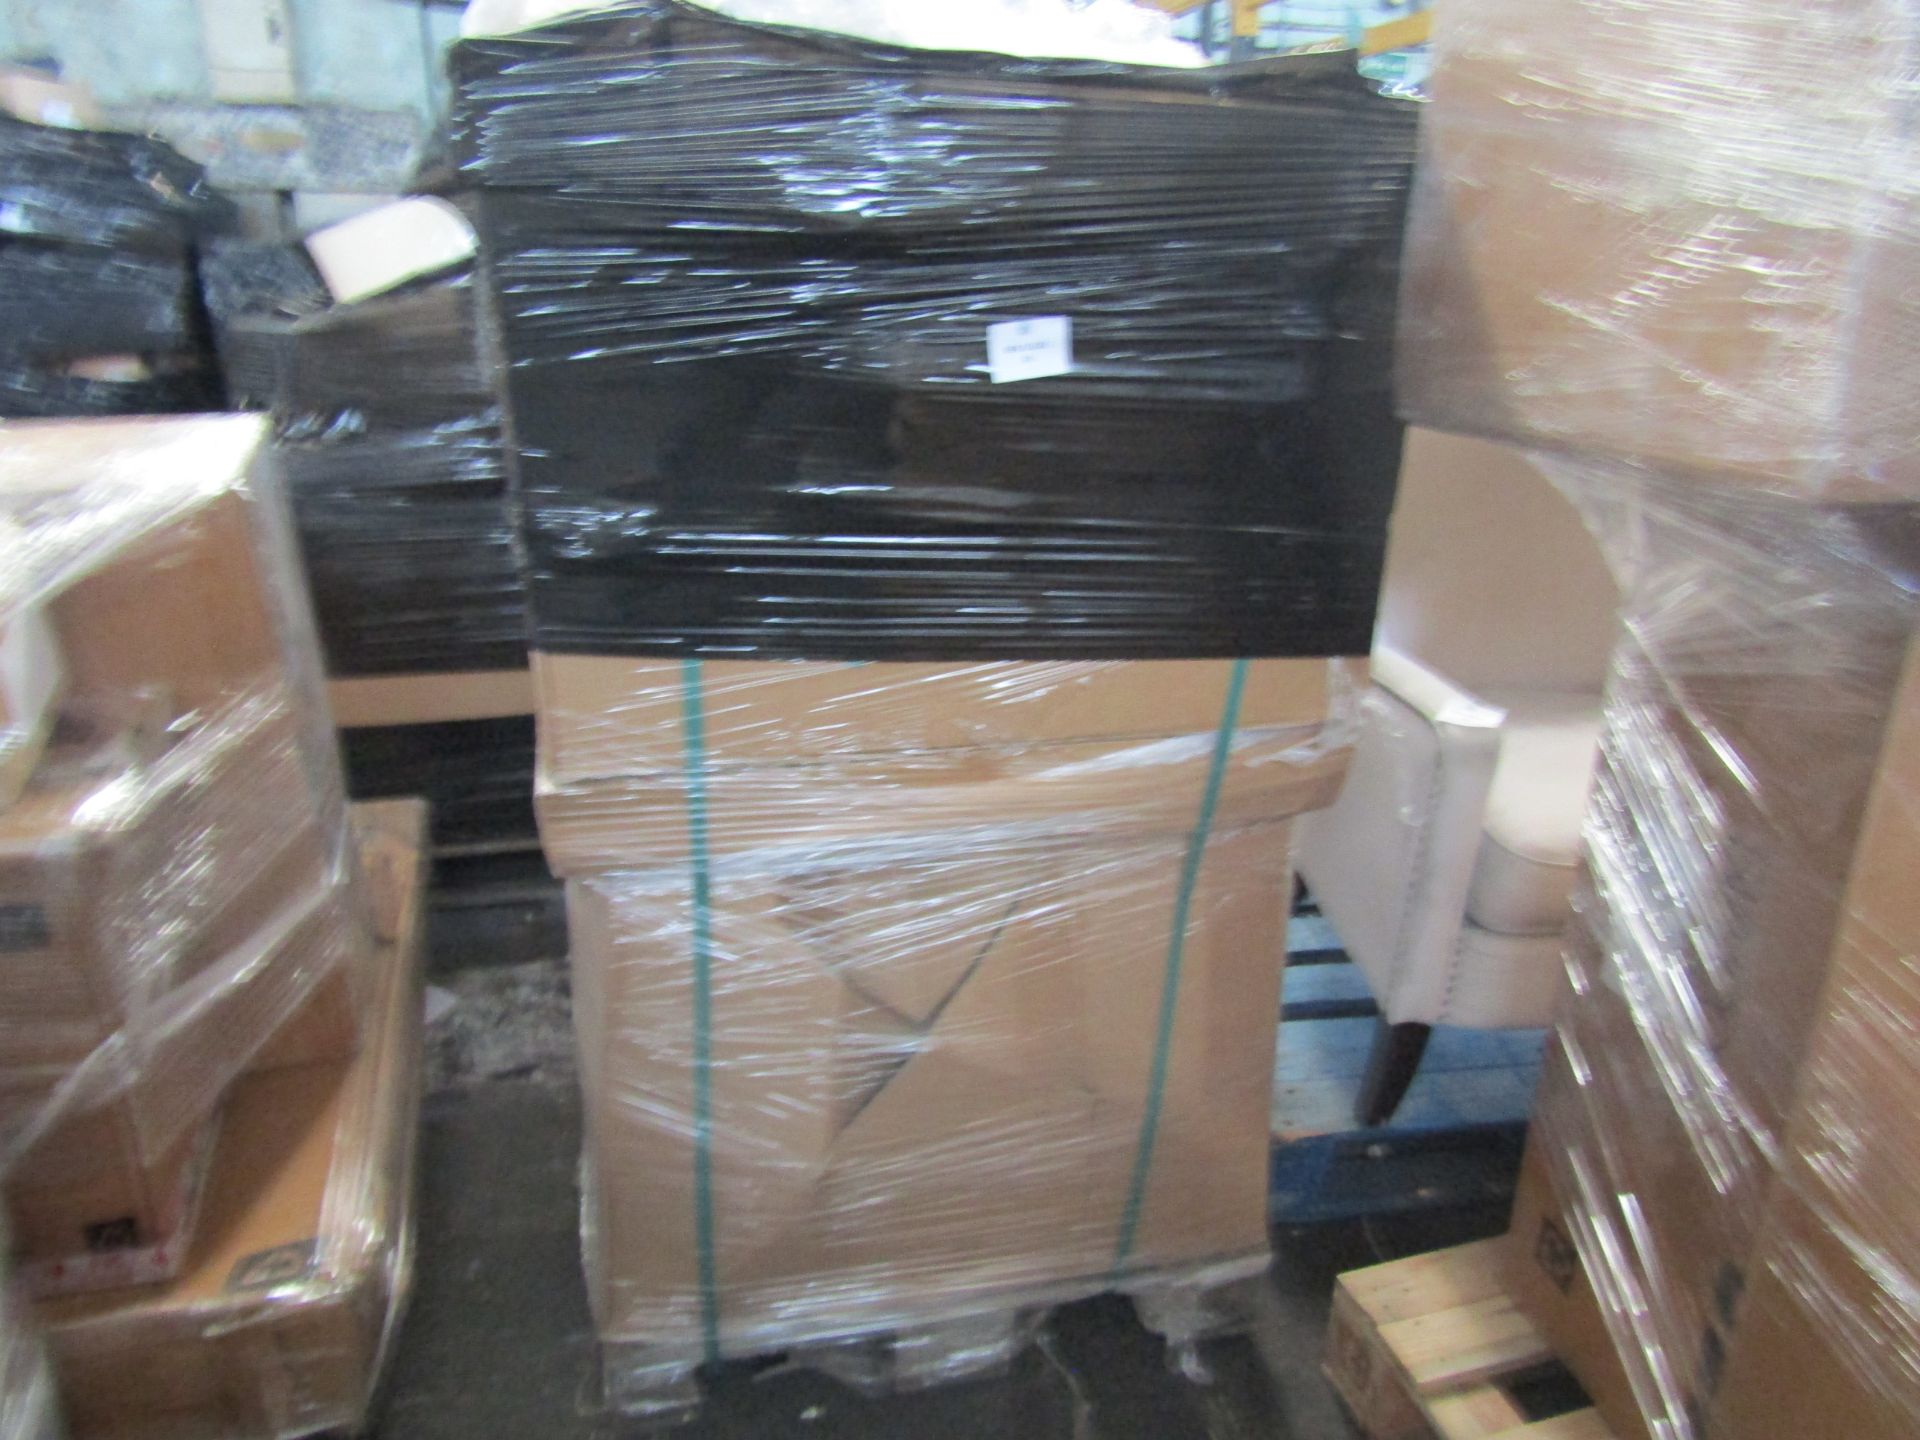 PALLET OF END OF LINE CHELSOM LIGHTING. PALLETS ARE UNMANIFESTED AND UNCHECKED